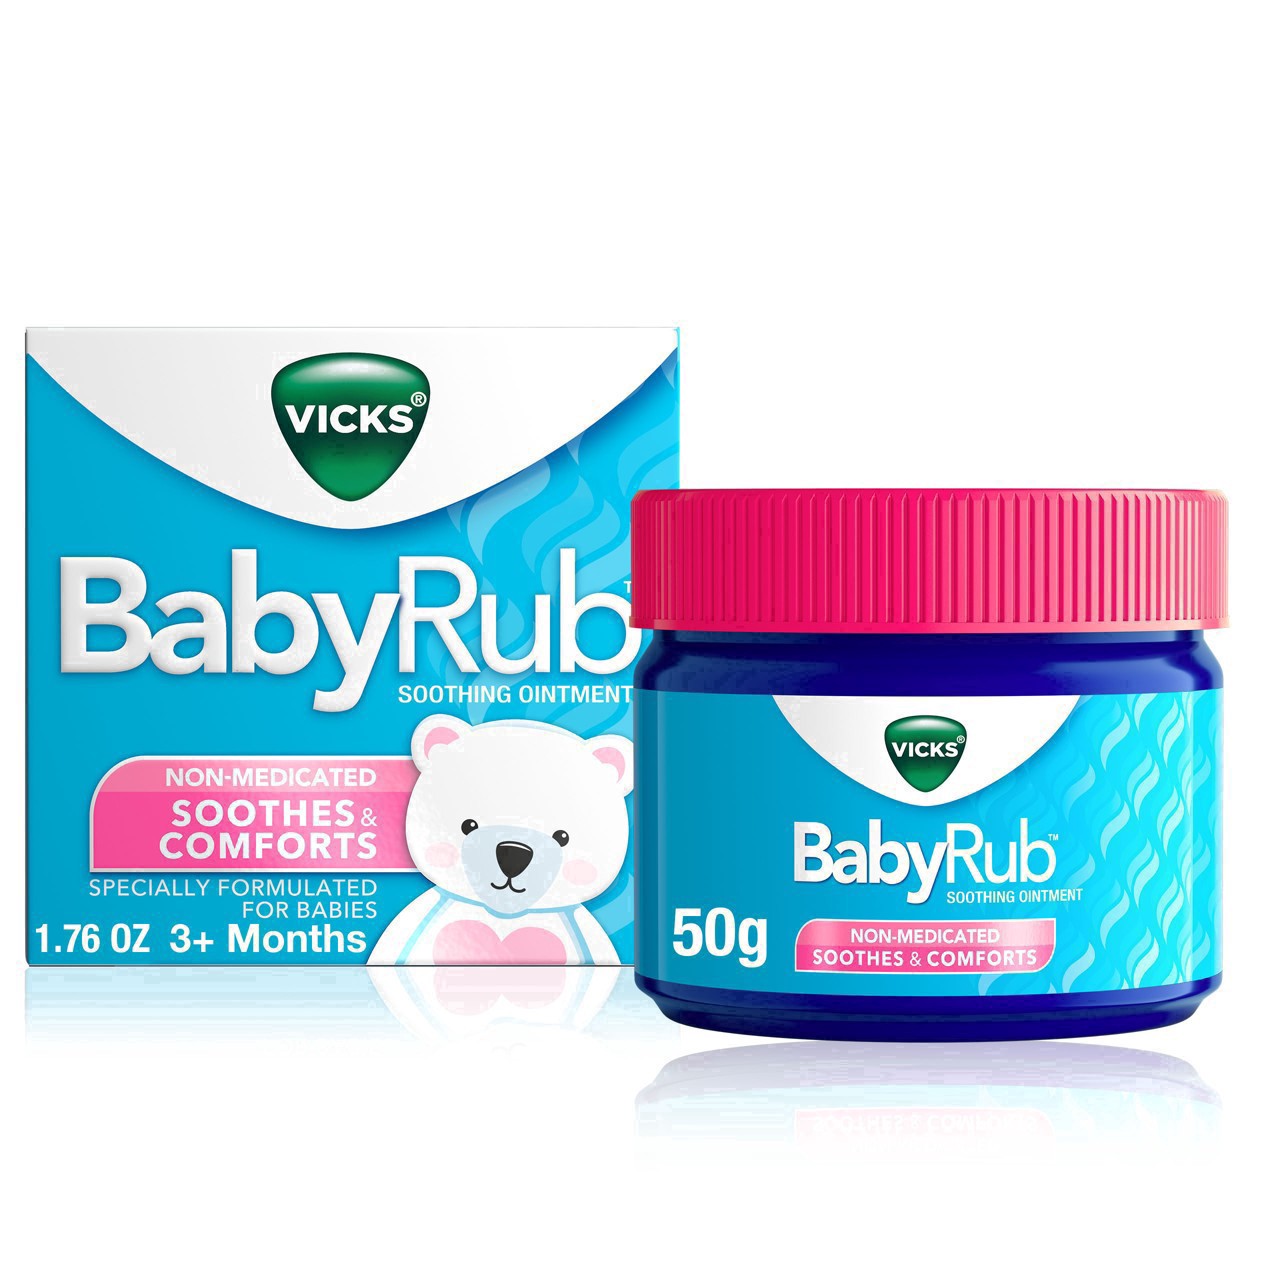 slide 54 of 78, Vicks BabyRub, Chest Rub Ointment with Soothing Aloe, Eucalyptus, Lavender, and Rosemary, from The Makers of VapoRub, 1.76 oz, 1.76 oz